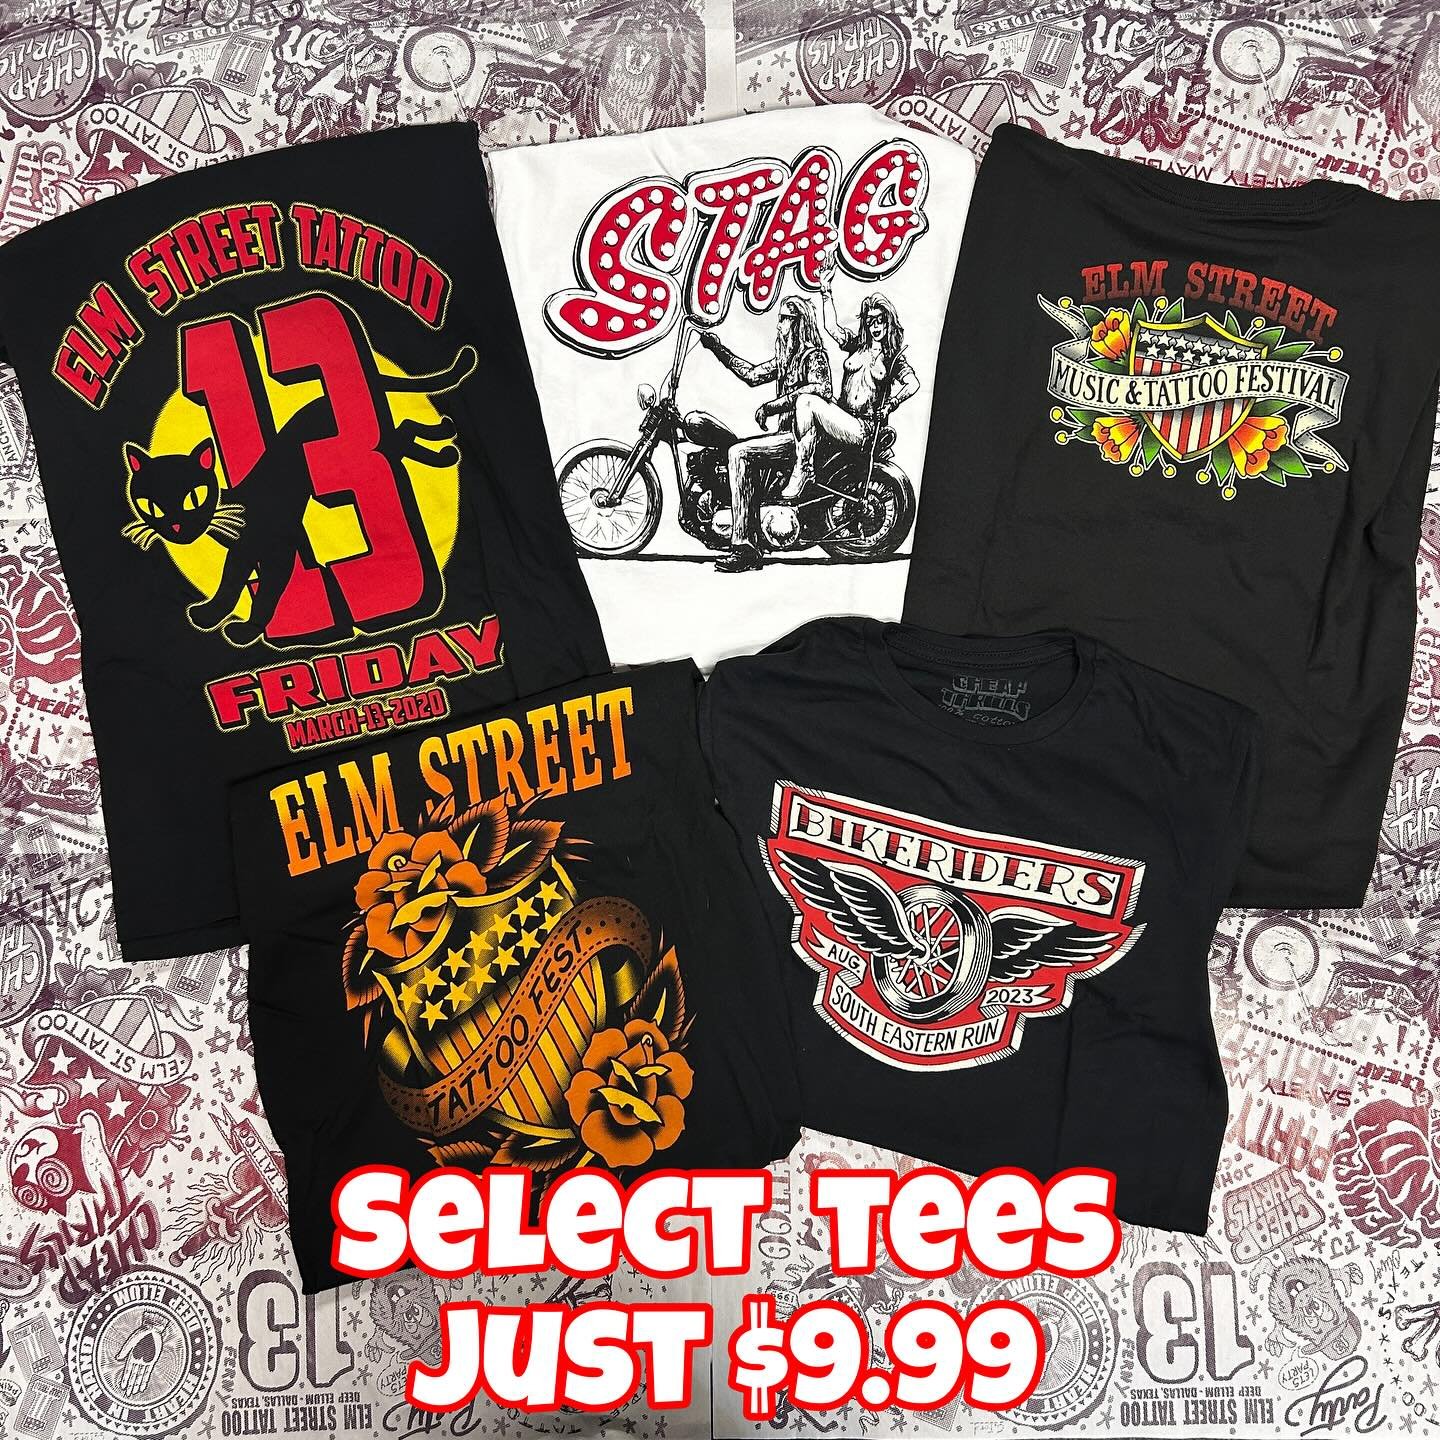 Smokin&rsquo; 🔥HOTT🔥deals!
🔸FREE SHIPPING IN US (Orders of $35 or more)
🔸Only available online at Anchor Screen Printing (.com)
🔸SALE Link to store in profile!

#G&Oslash;&Oslash;DT&Iuml;MĘ&Scaron;
@elmstreettattoo
#smokinghotdeals
#elmstreettat